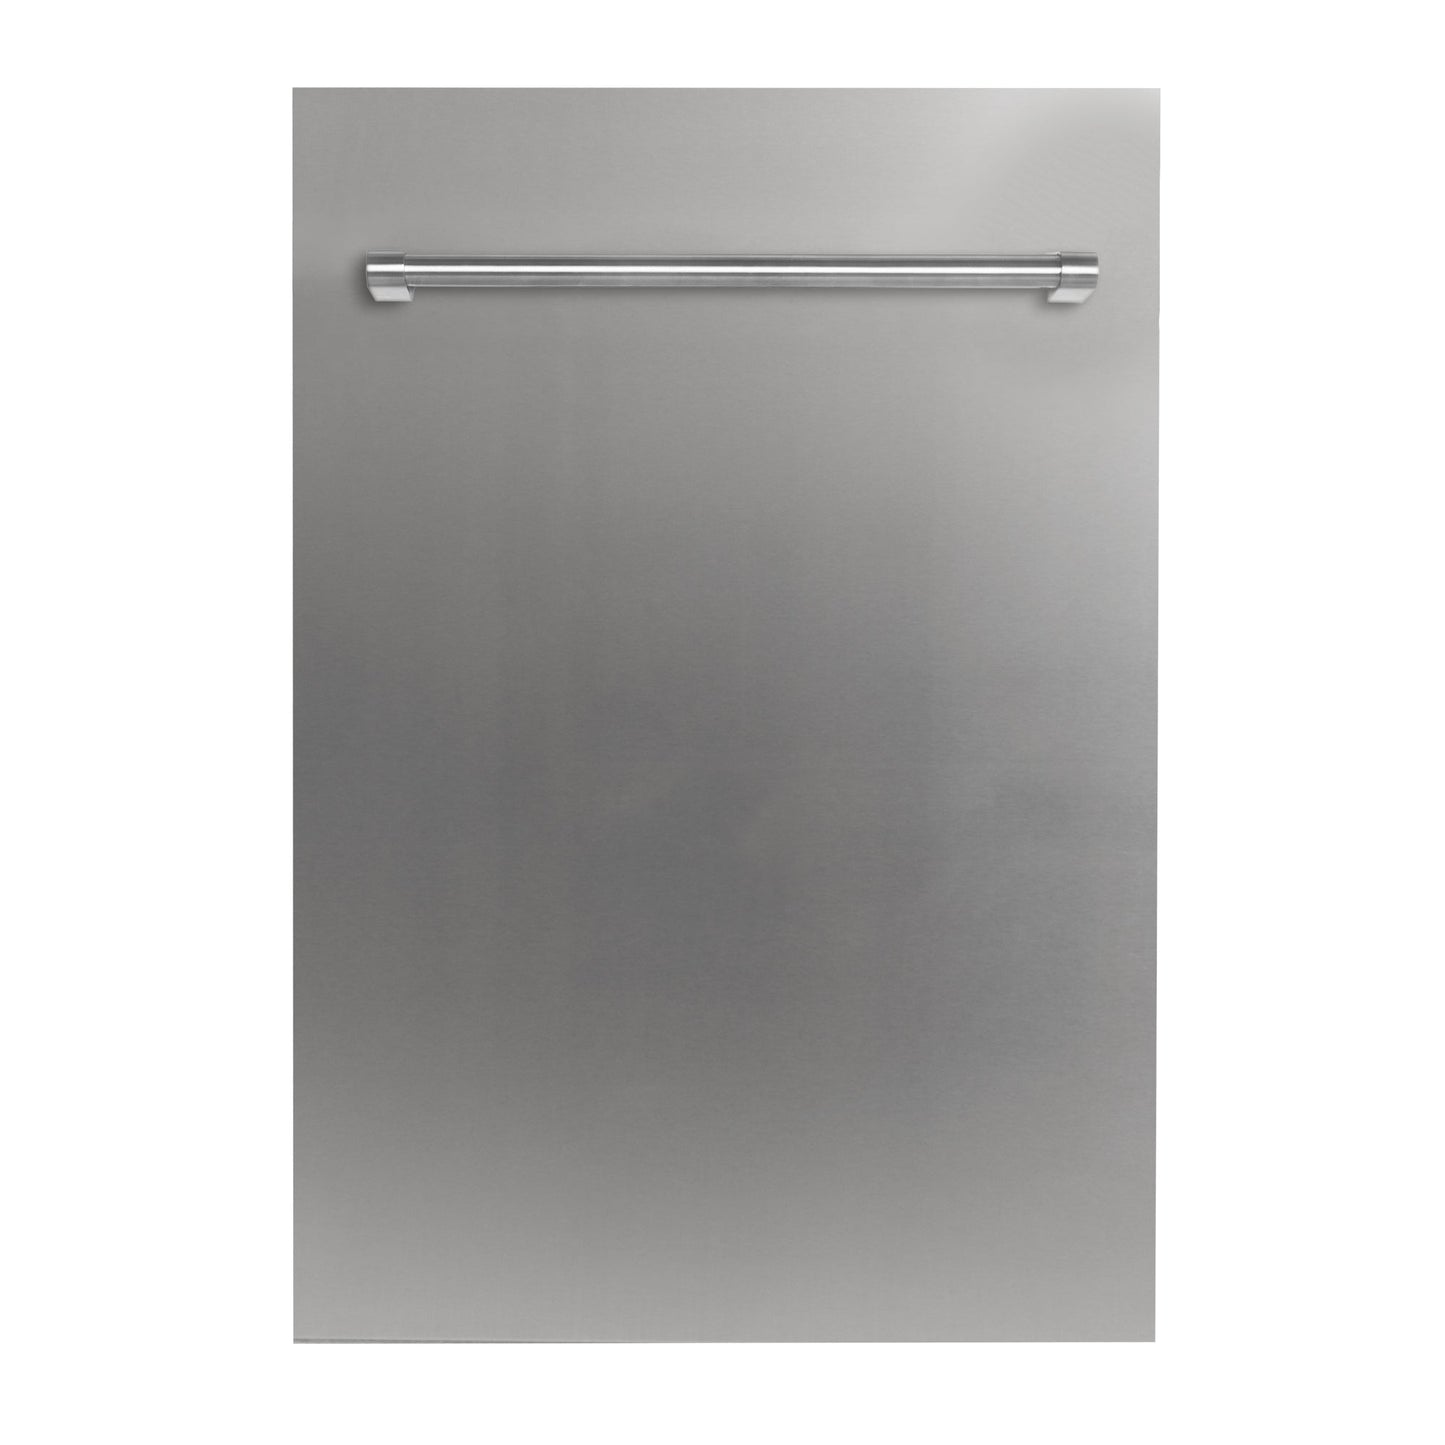 ZLINE 18 in. Compact Top Control Dishwasher with Stainless Steel Panel and Traditional Handle, 52dBa (DW-304-H-18)